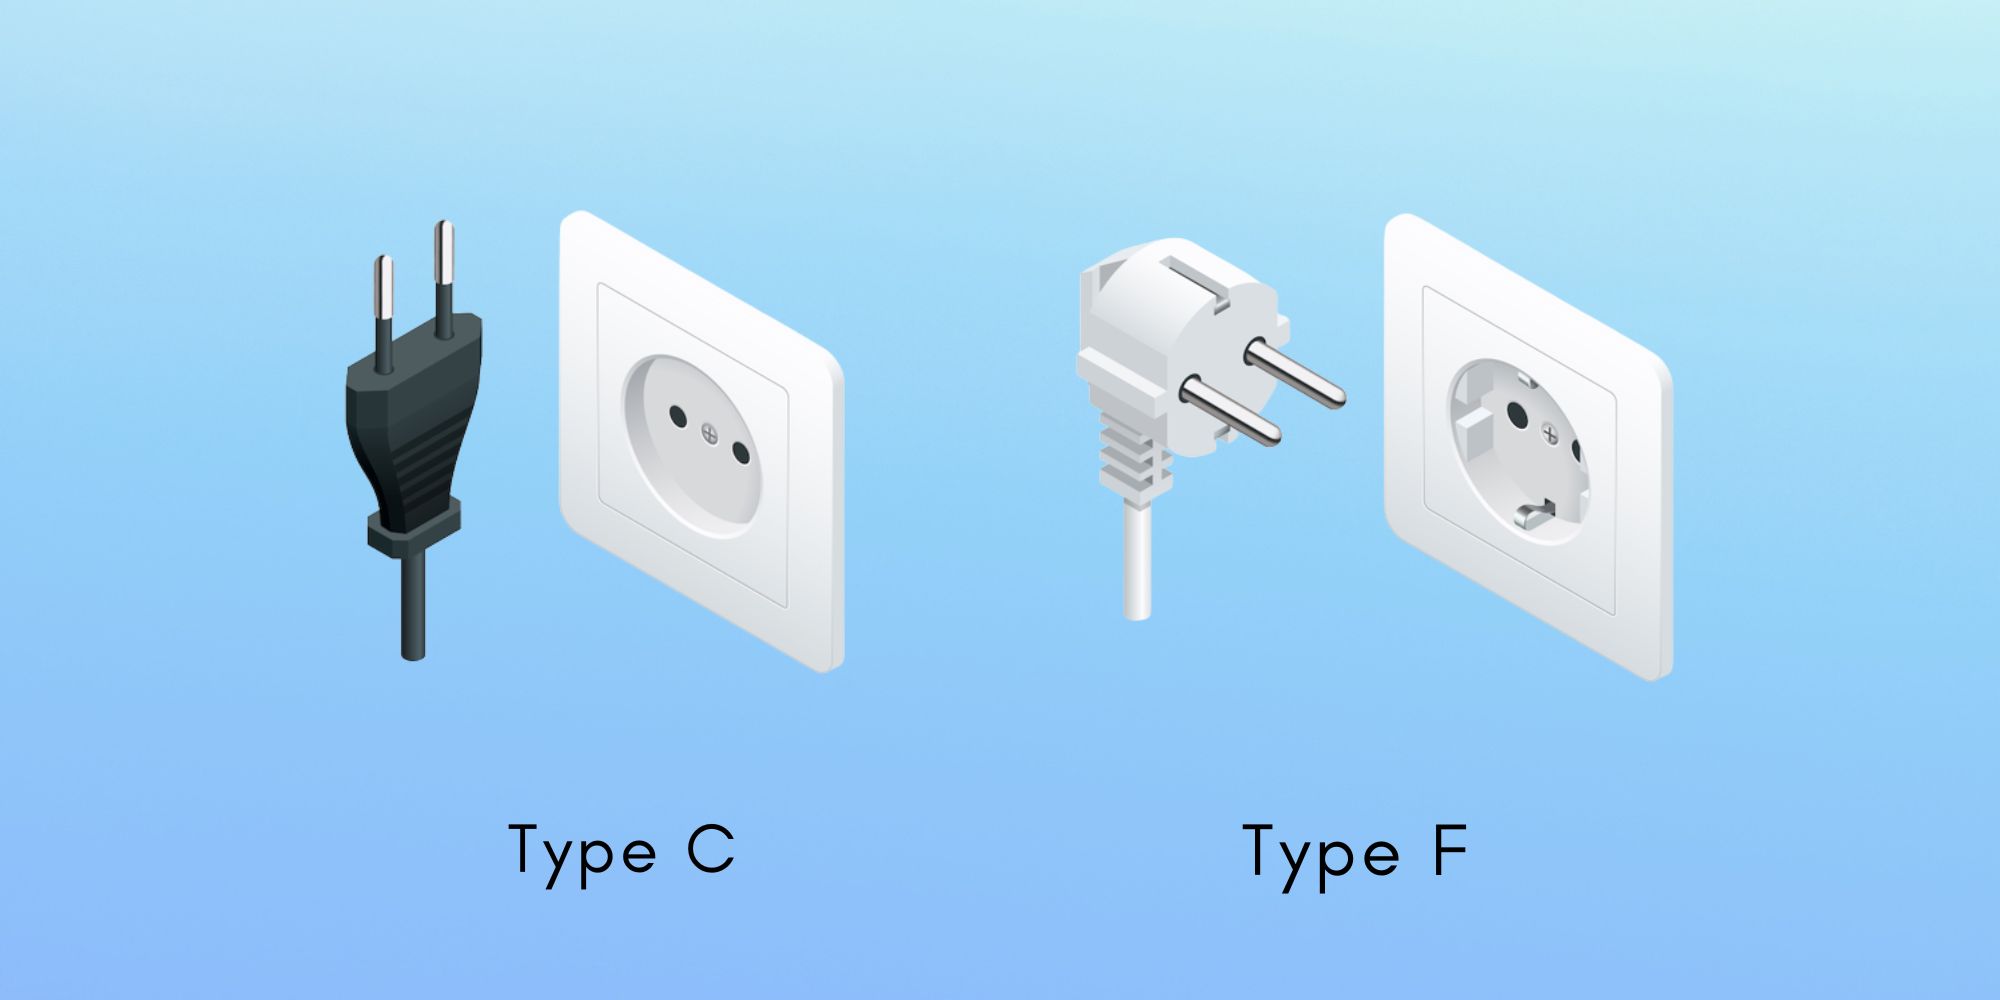 South Korea Power Plugs and Sockets: Type C and Type F